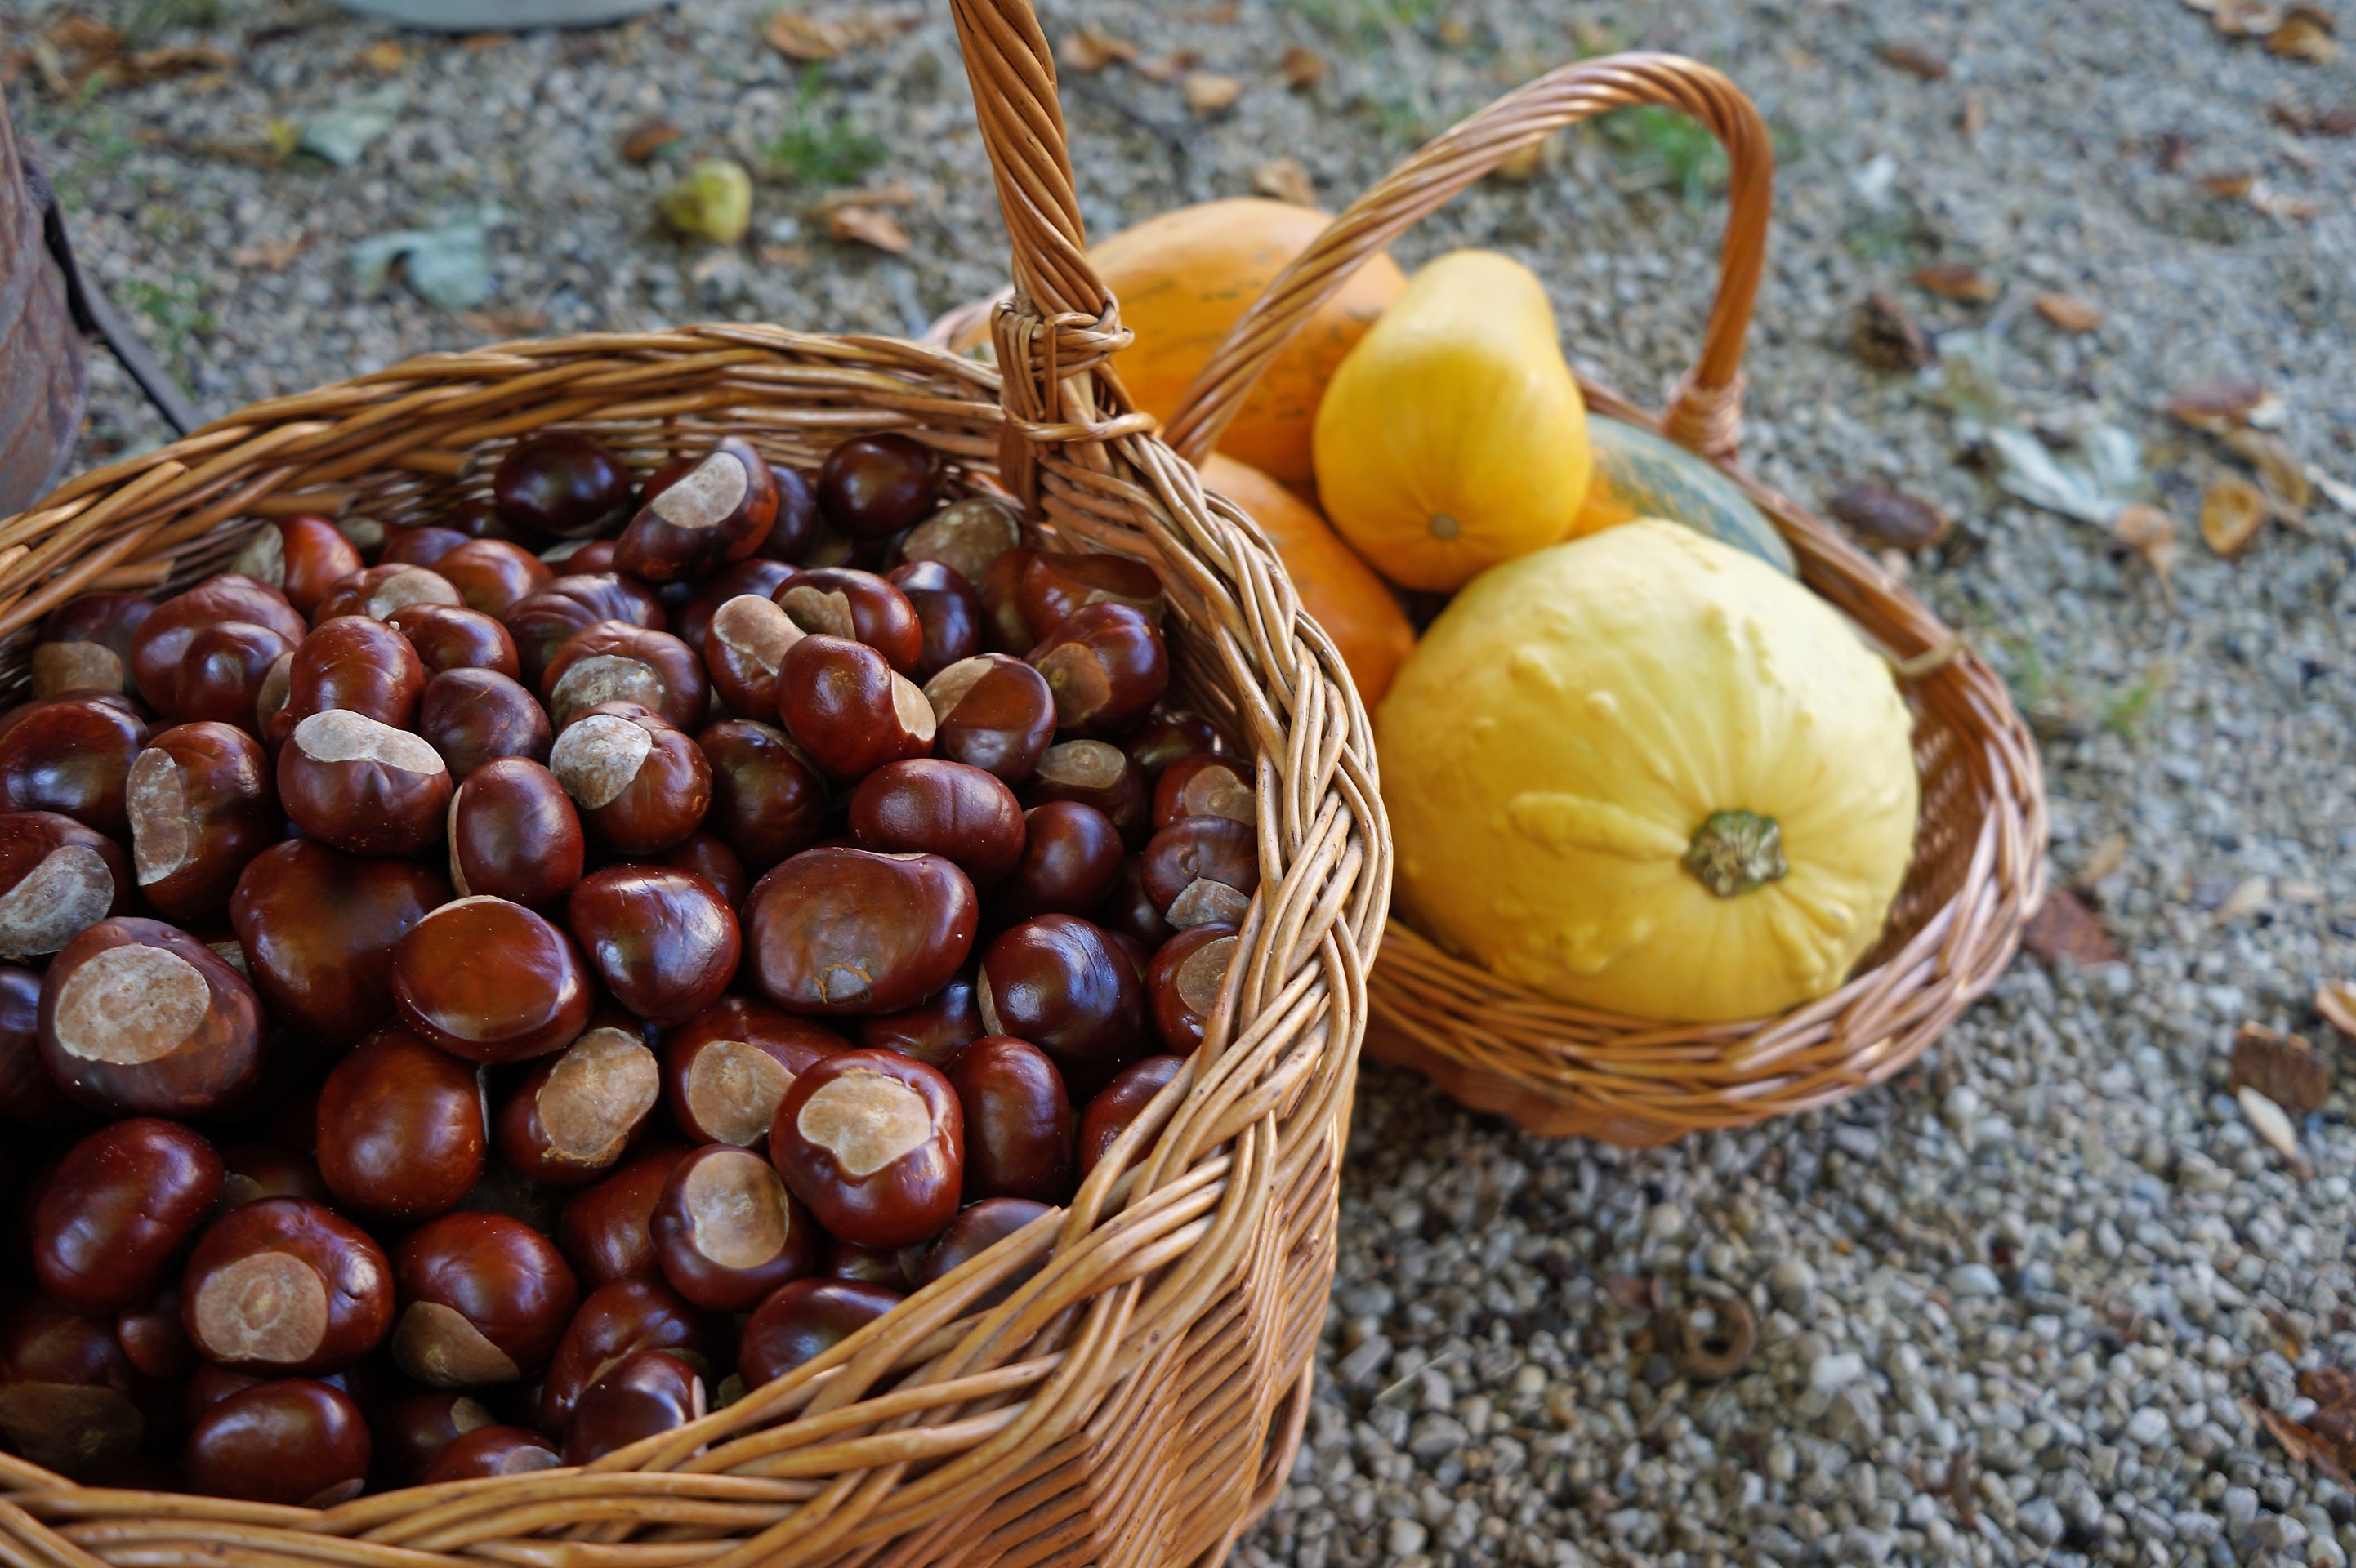 Autumn harvest in different baskets free image download